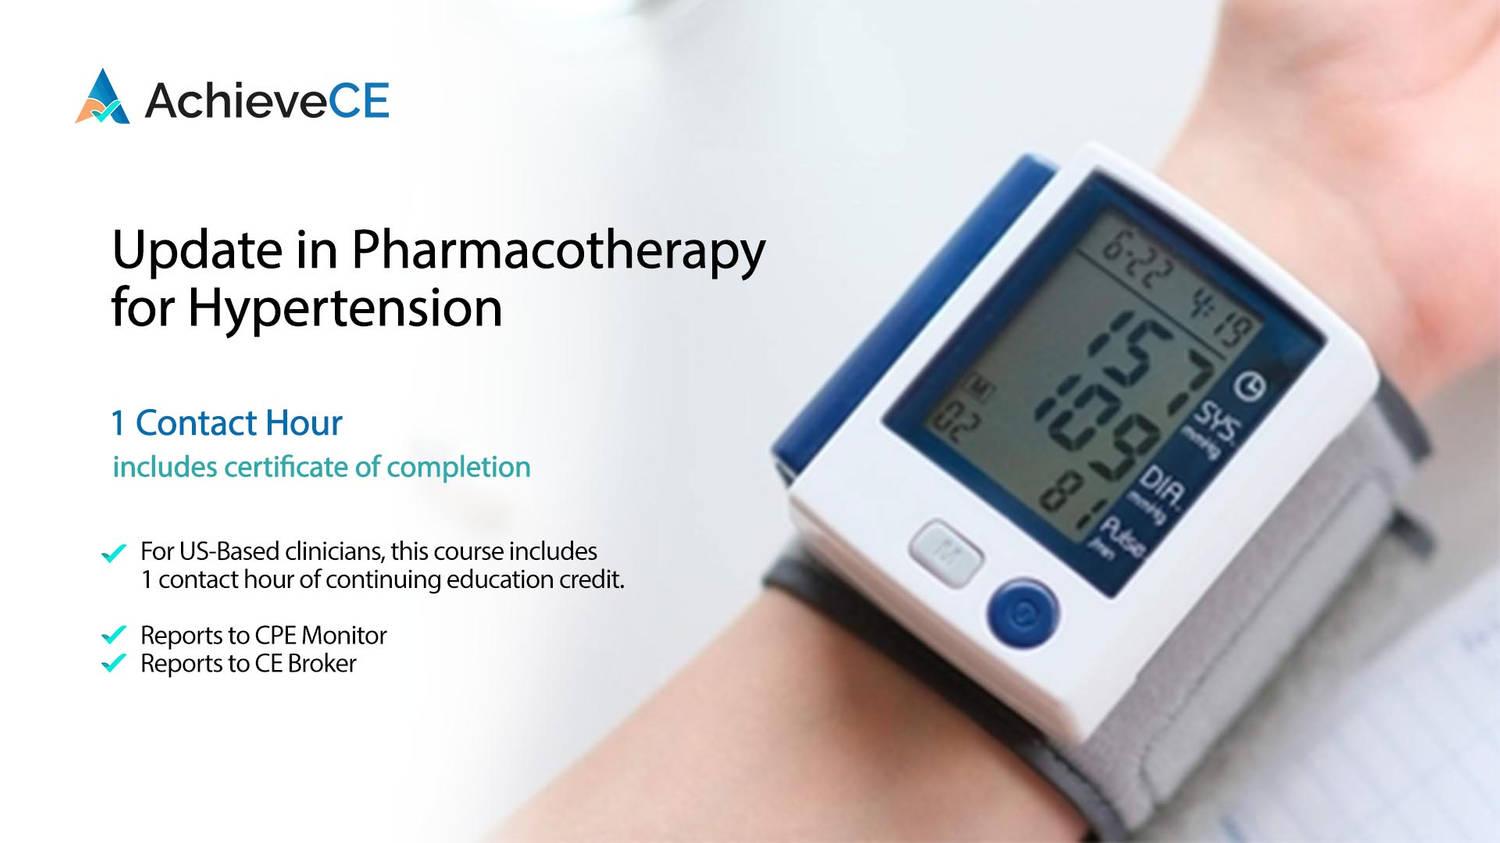 Update in Pharmacotherapy for Hypertension - 1 Contact Hour